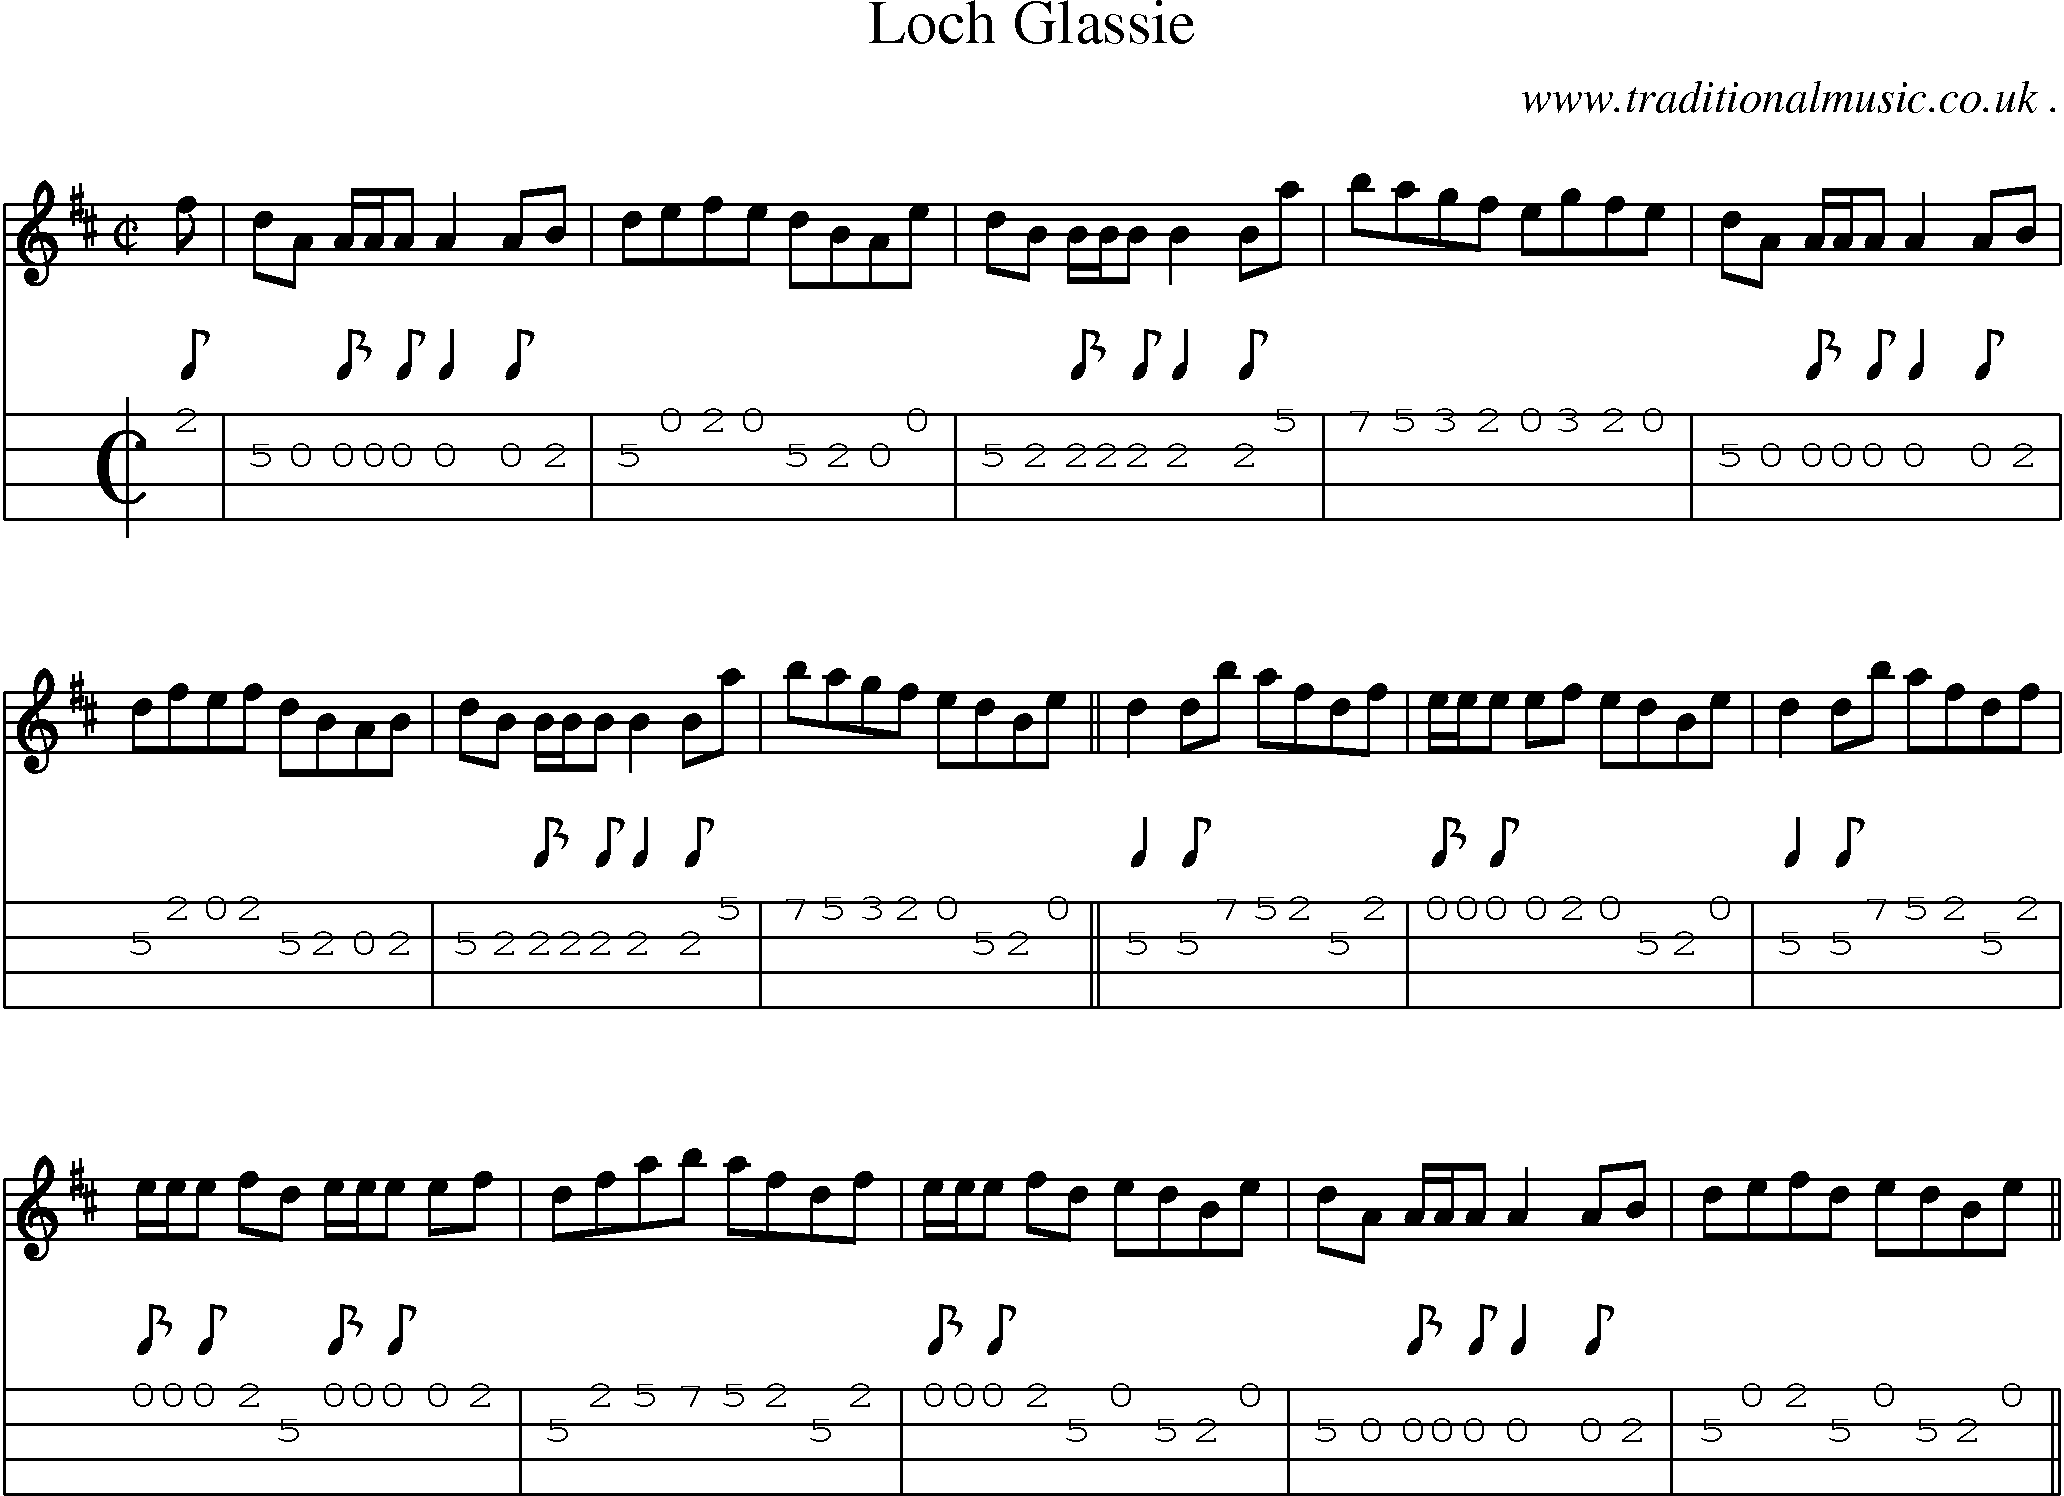 Sheet-music  score, Chords and Mandolin Tabs for Loch Glassie